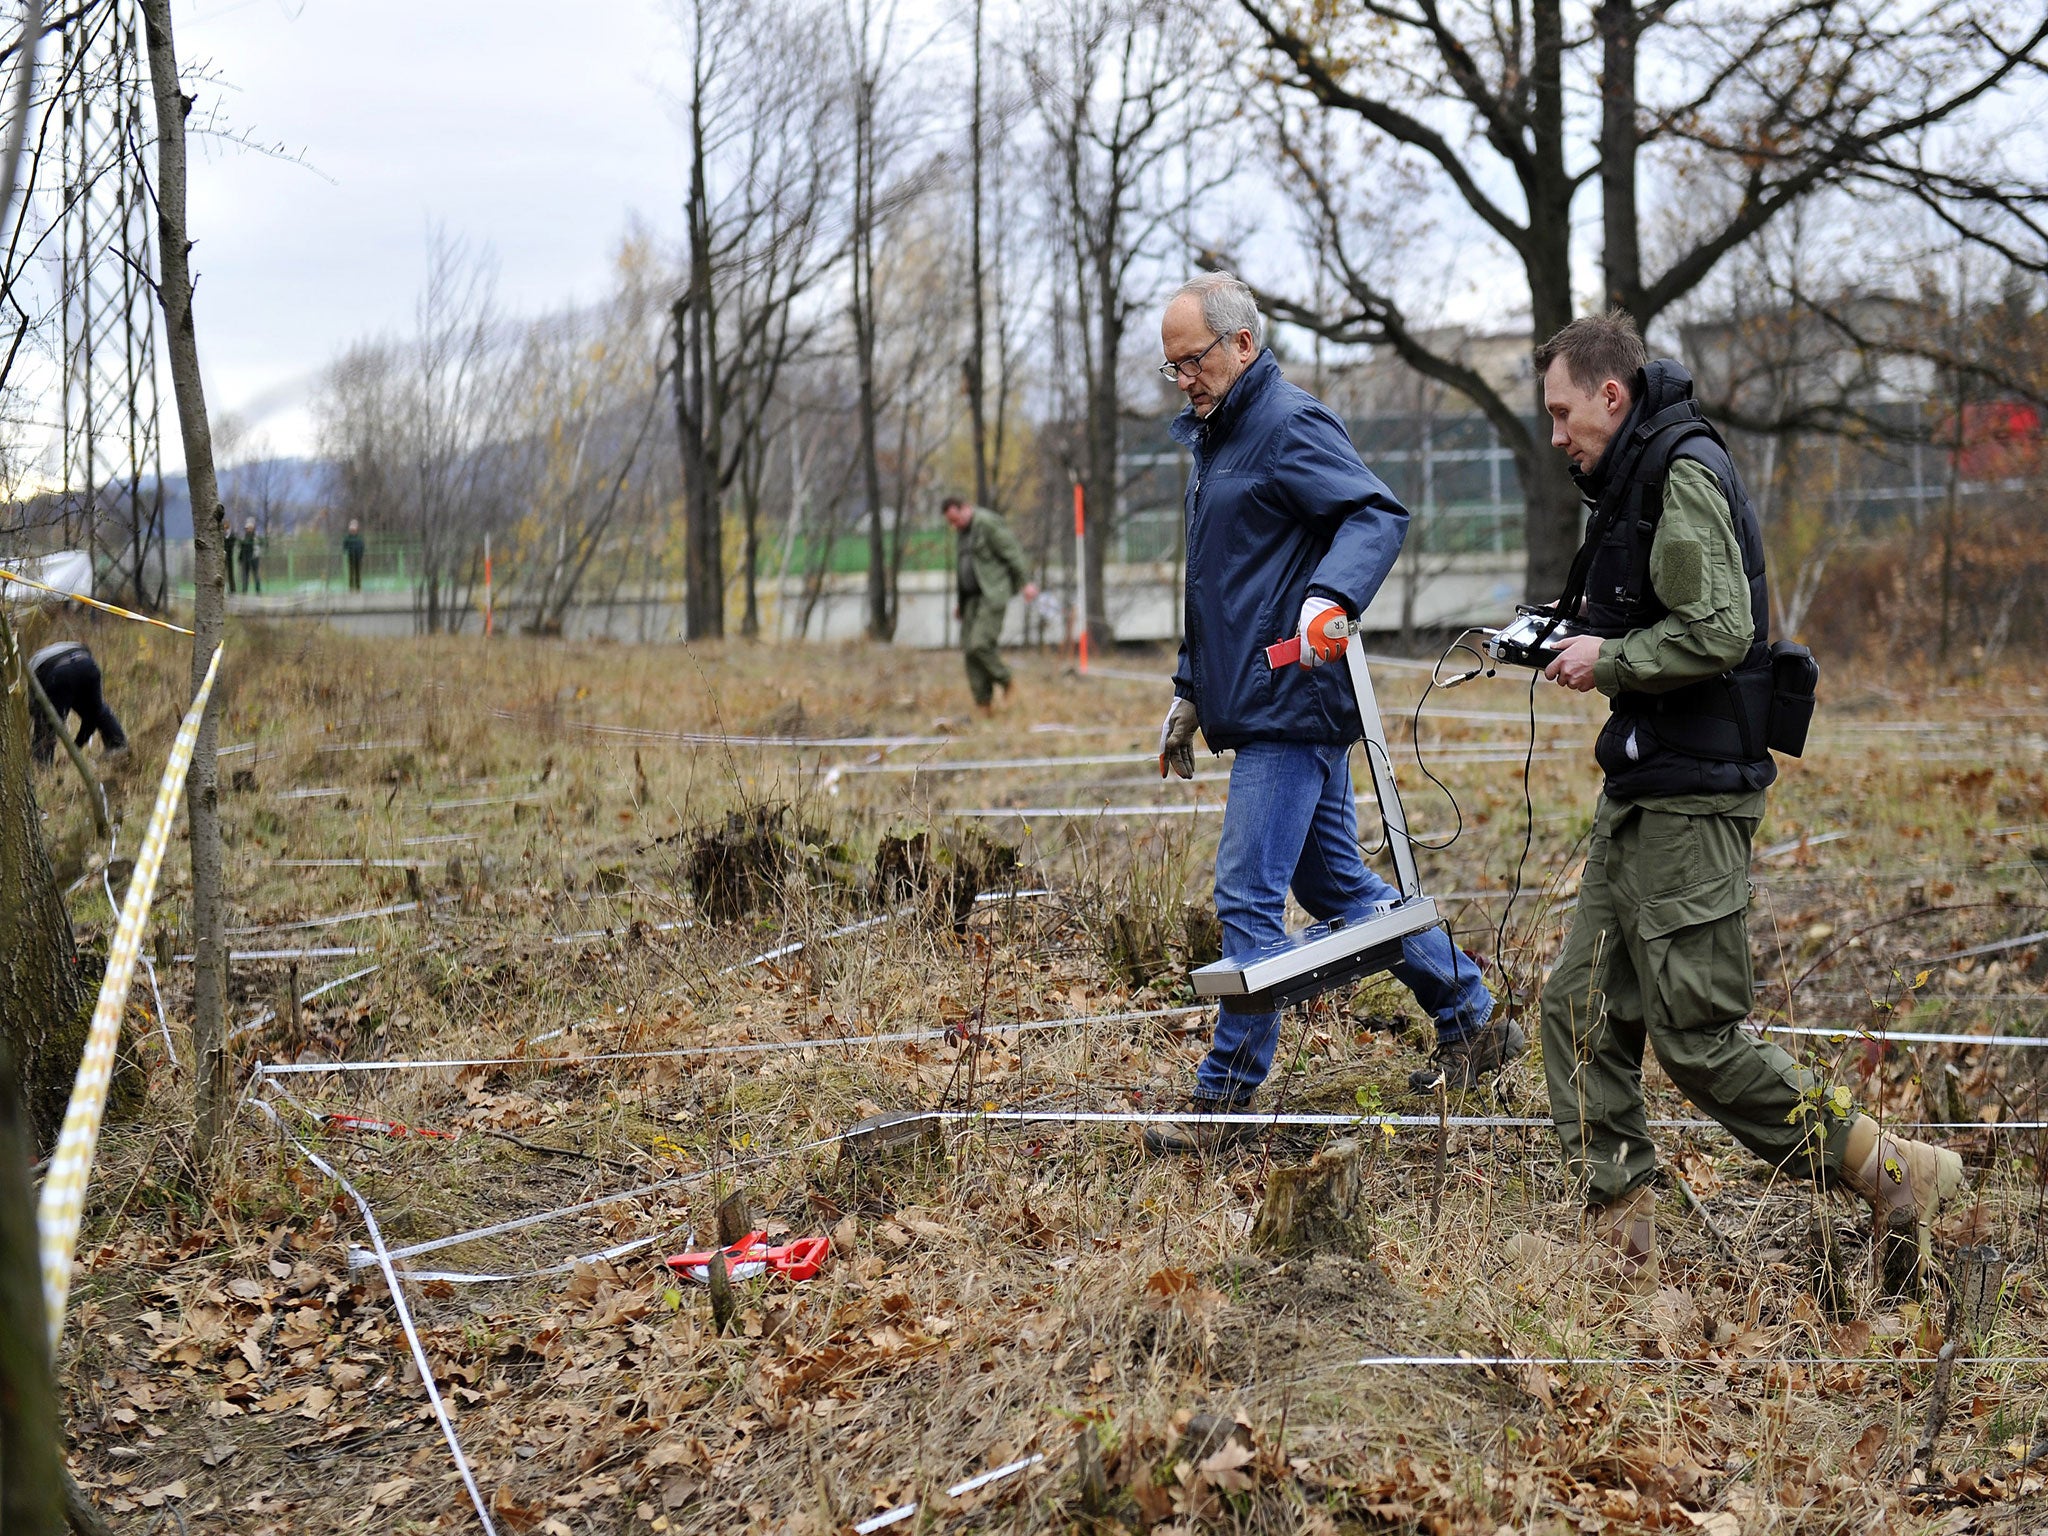 Experts use Ground-penetrating radar to inspect an area where a World War II Nazi train is supposed to be hidden